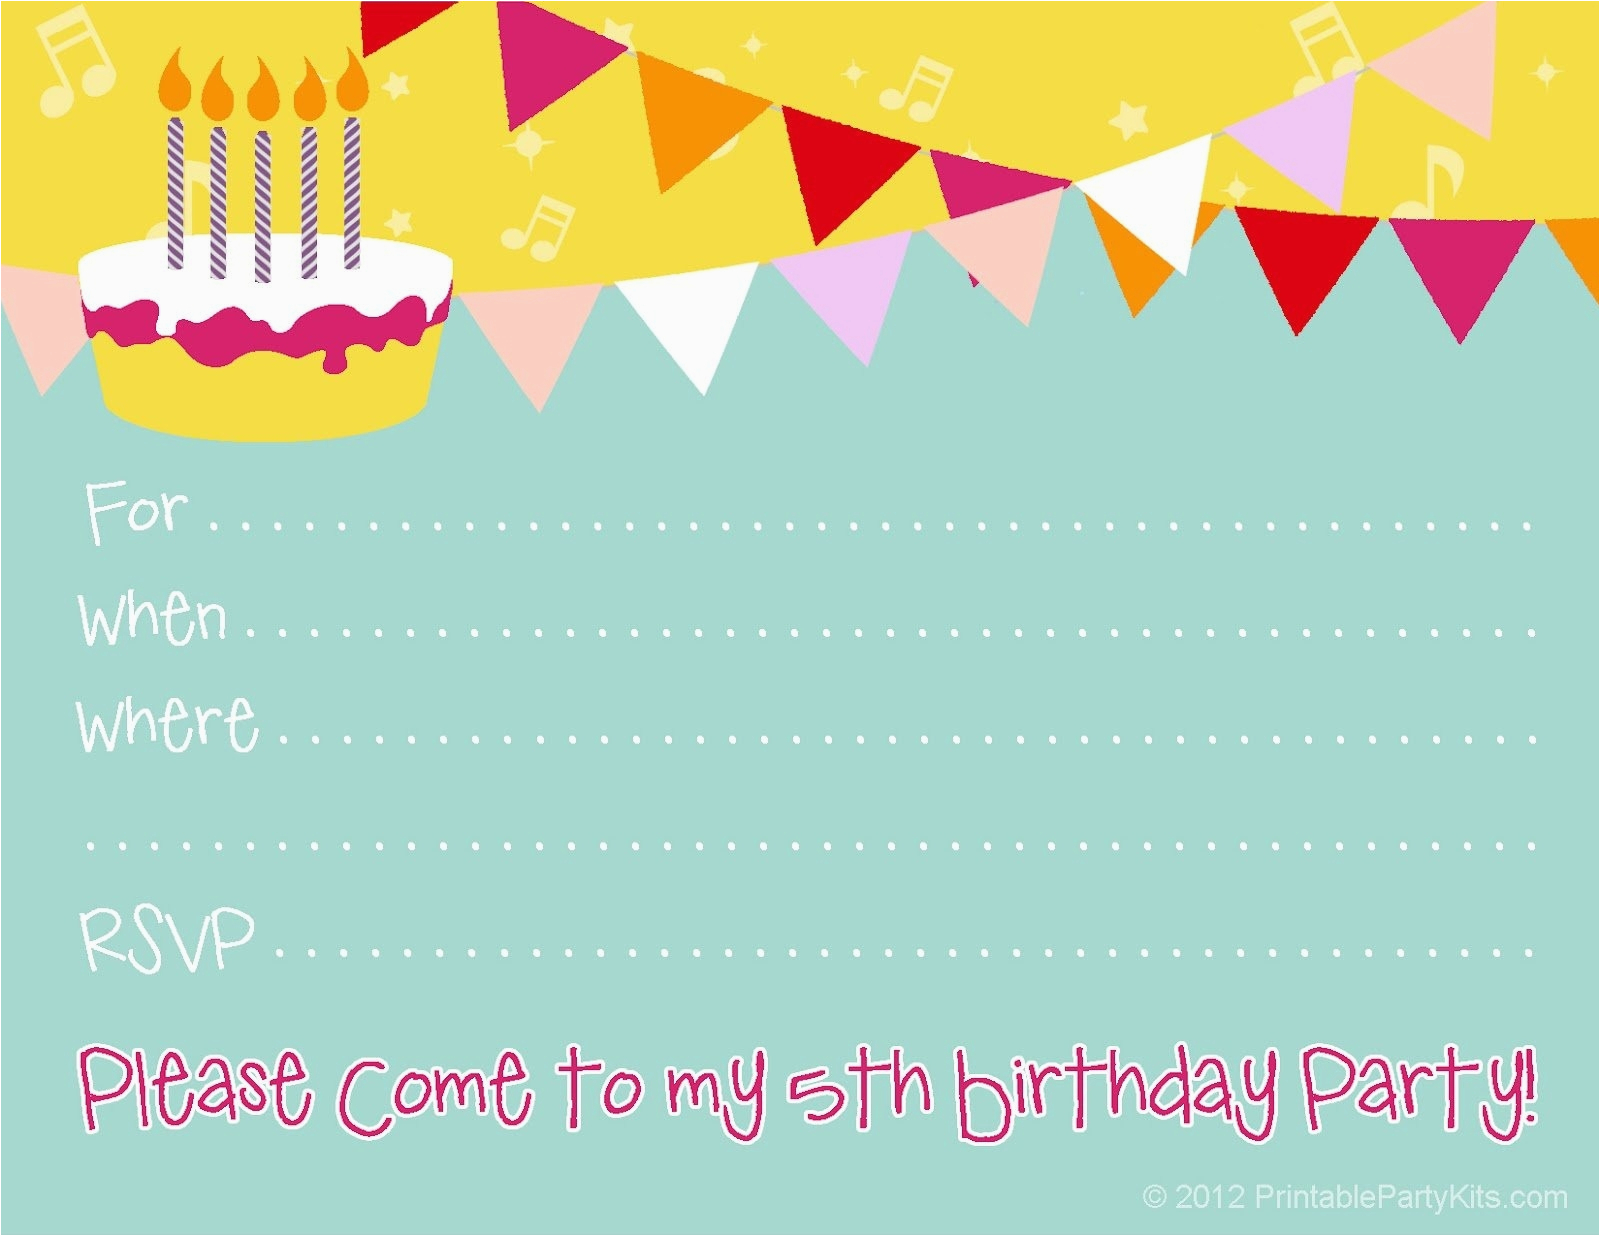 Create Your Own Birthday Card Online Free Printable Make 